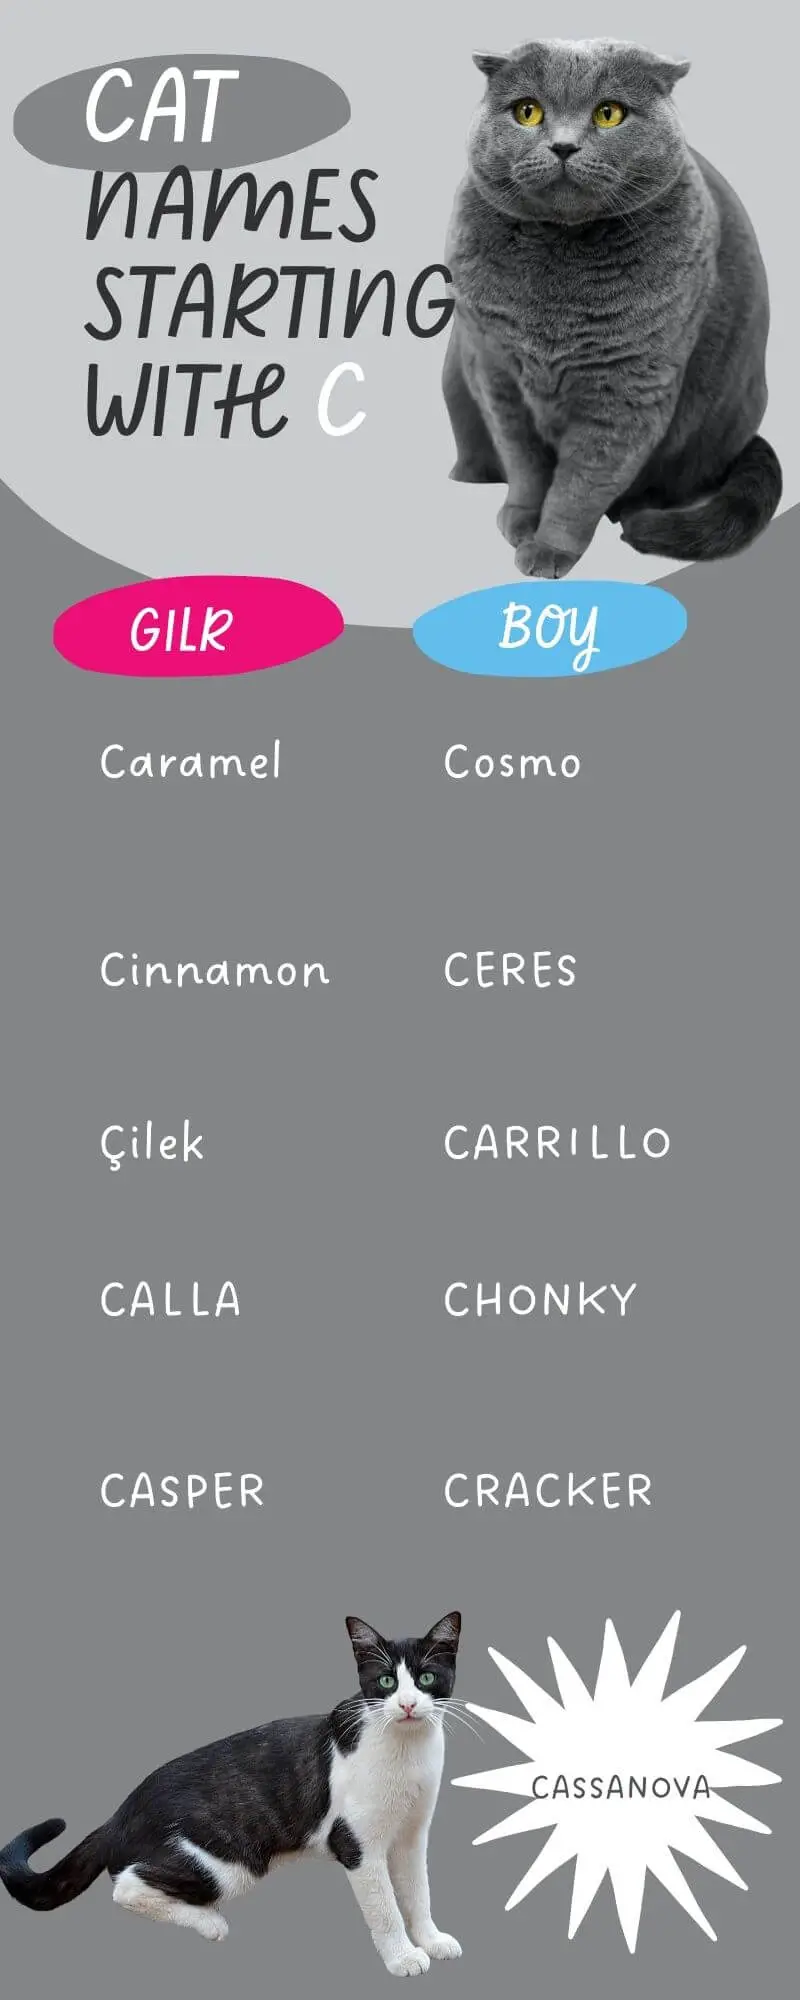 An infographic showing  the list of 10 Cat Names Starting with C for male and female cats